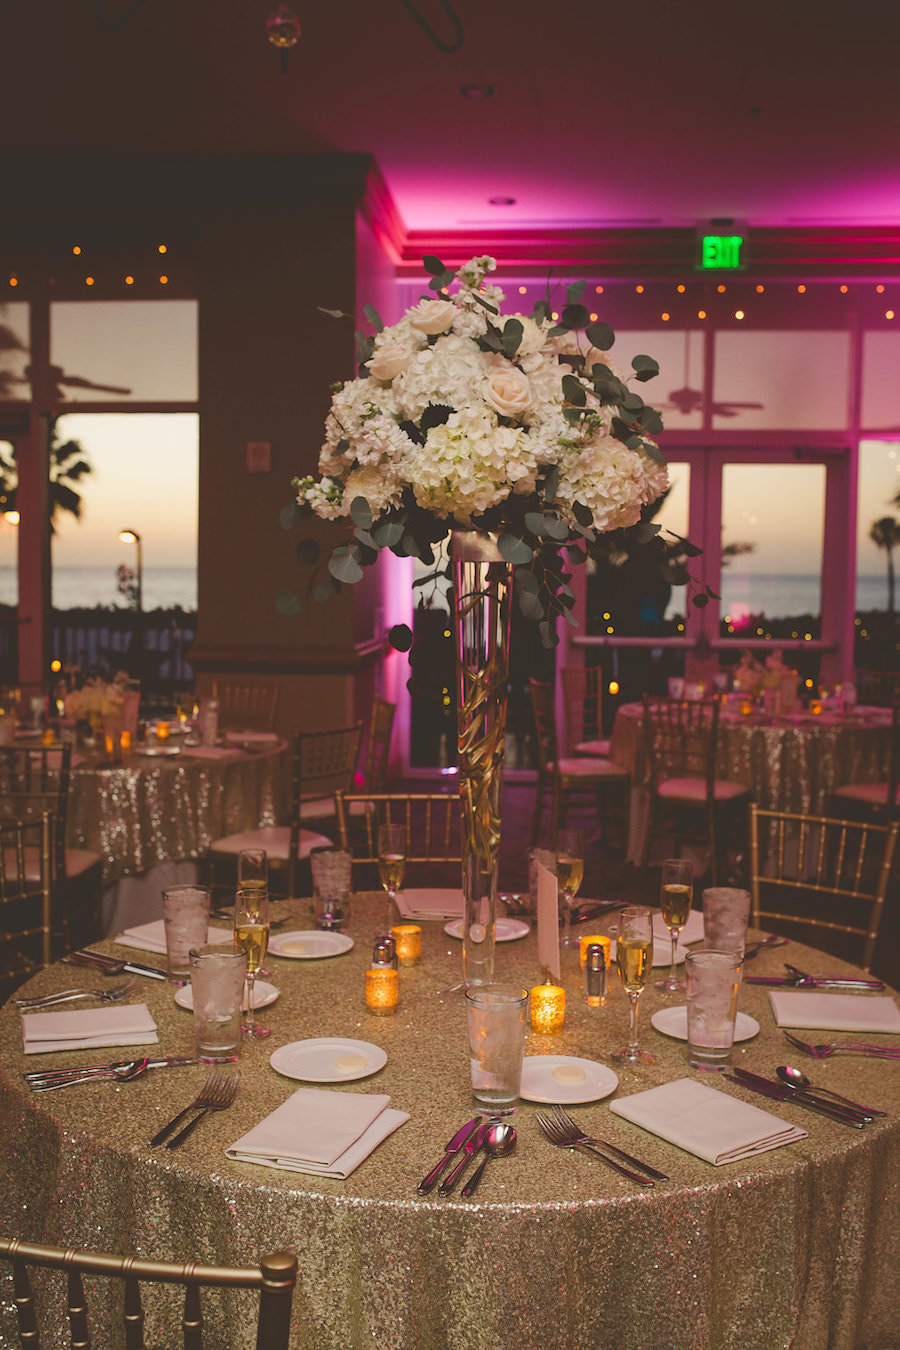 Timeless Gold and Blush Wedding Reception with Tall Glamorous White Hydrangea Centerpiece and Gold Table Linens and Chiavari Chairs | Tampa Bay Wedding Venue Hyatt Regency Clearwater Resort & Spa